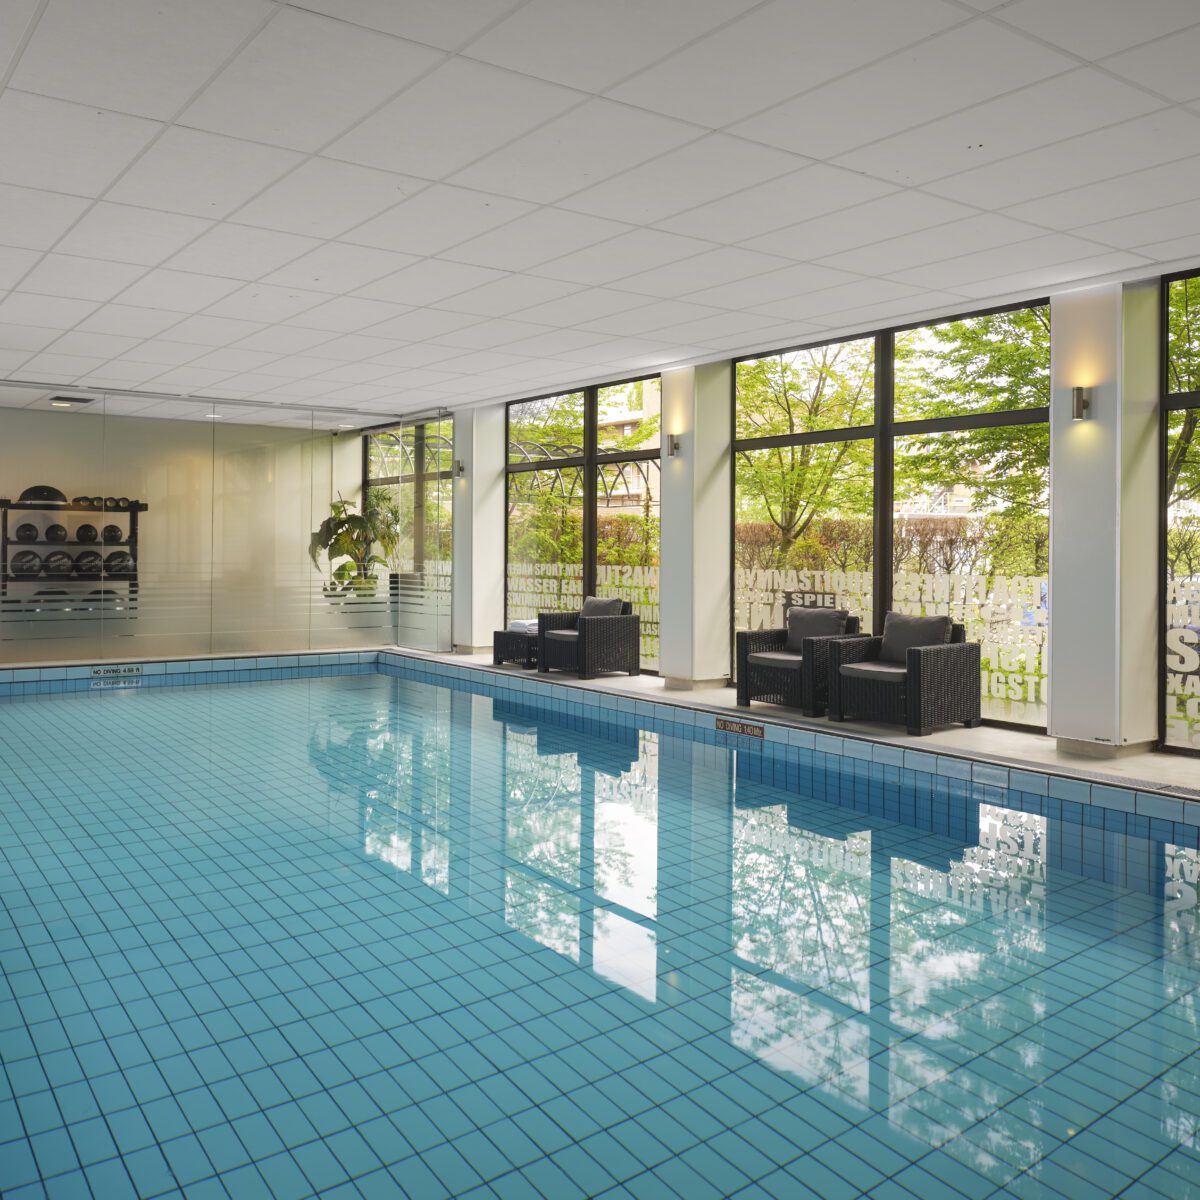 Park Plaza Eindhoven Fitness & Fun gym and pool area